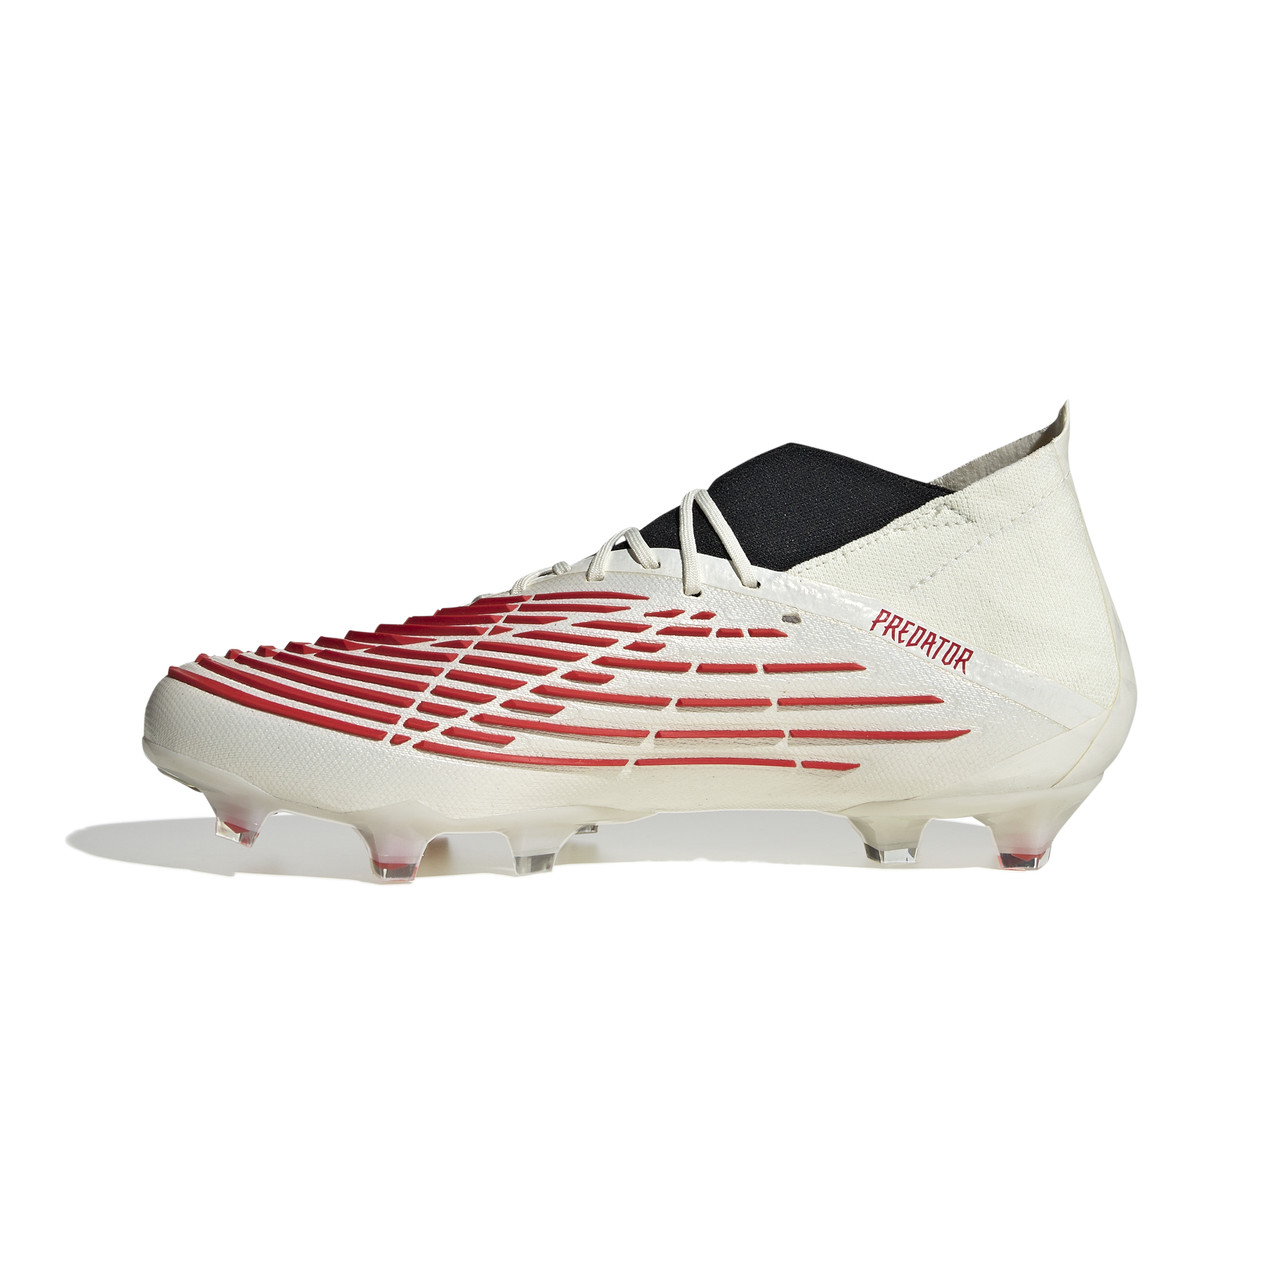 Edge.1 Ground Soccer Cleats - Chicago Soccer